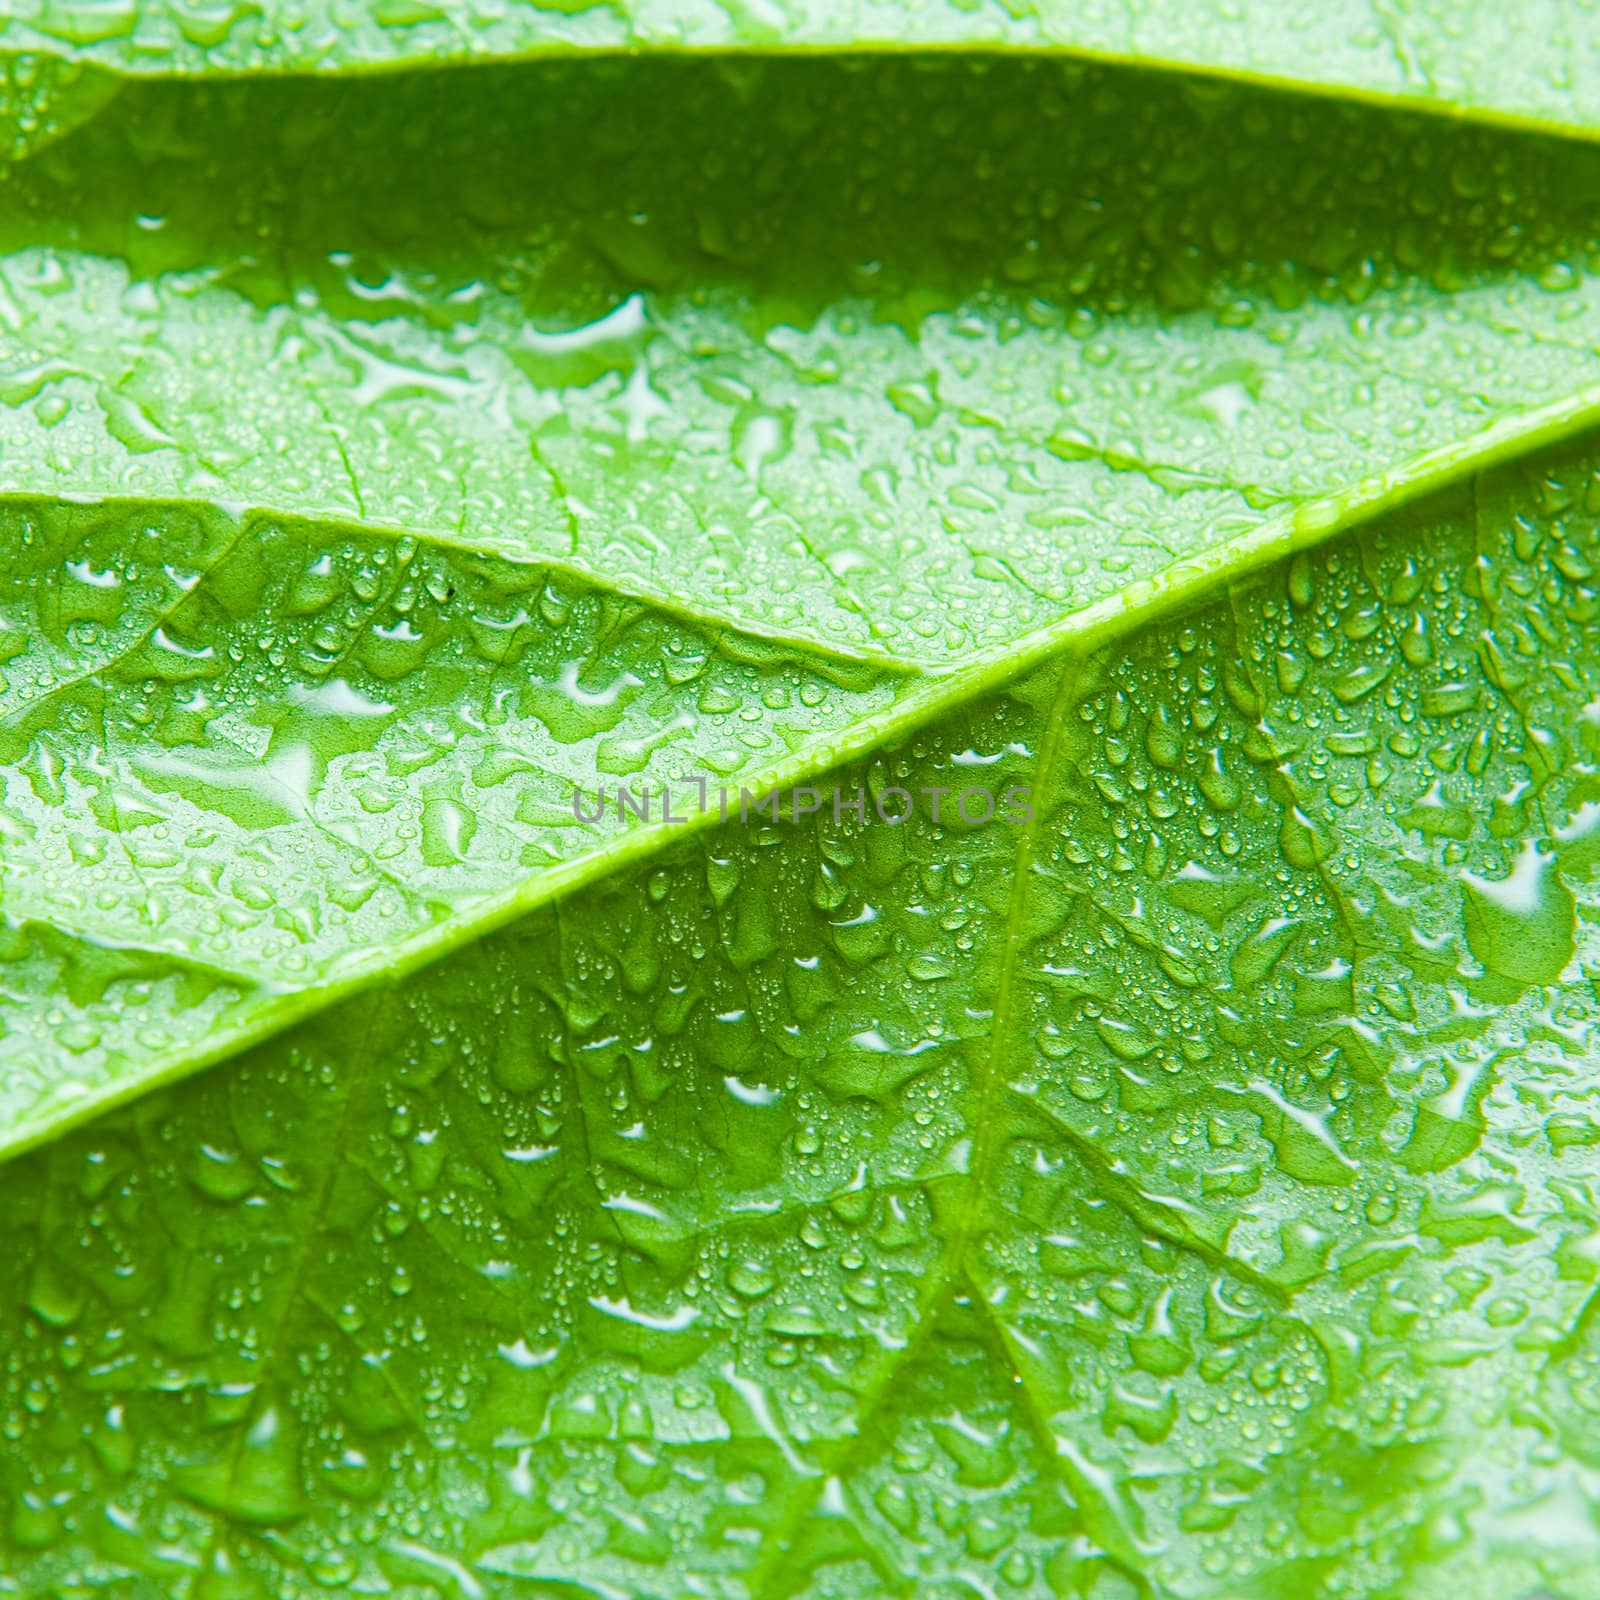 Wet Leaf by Luminis